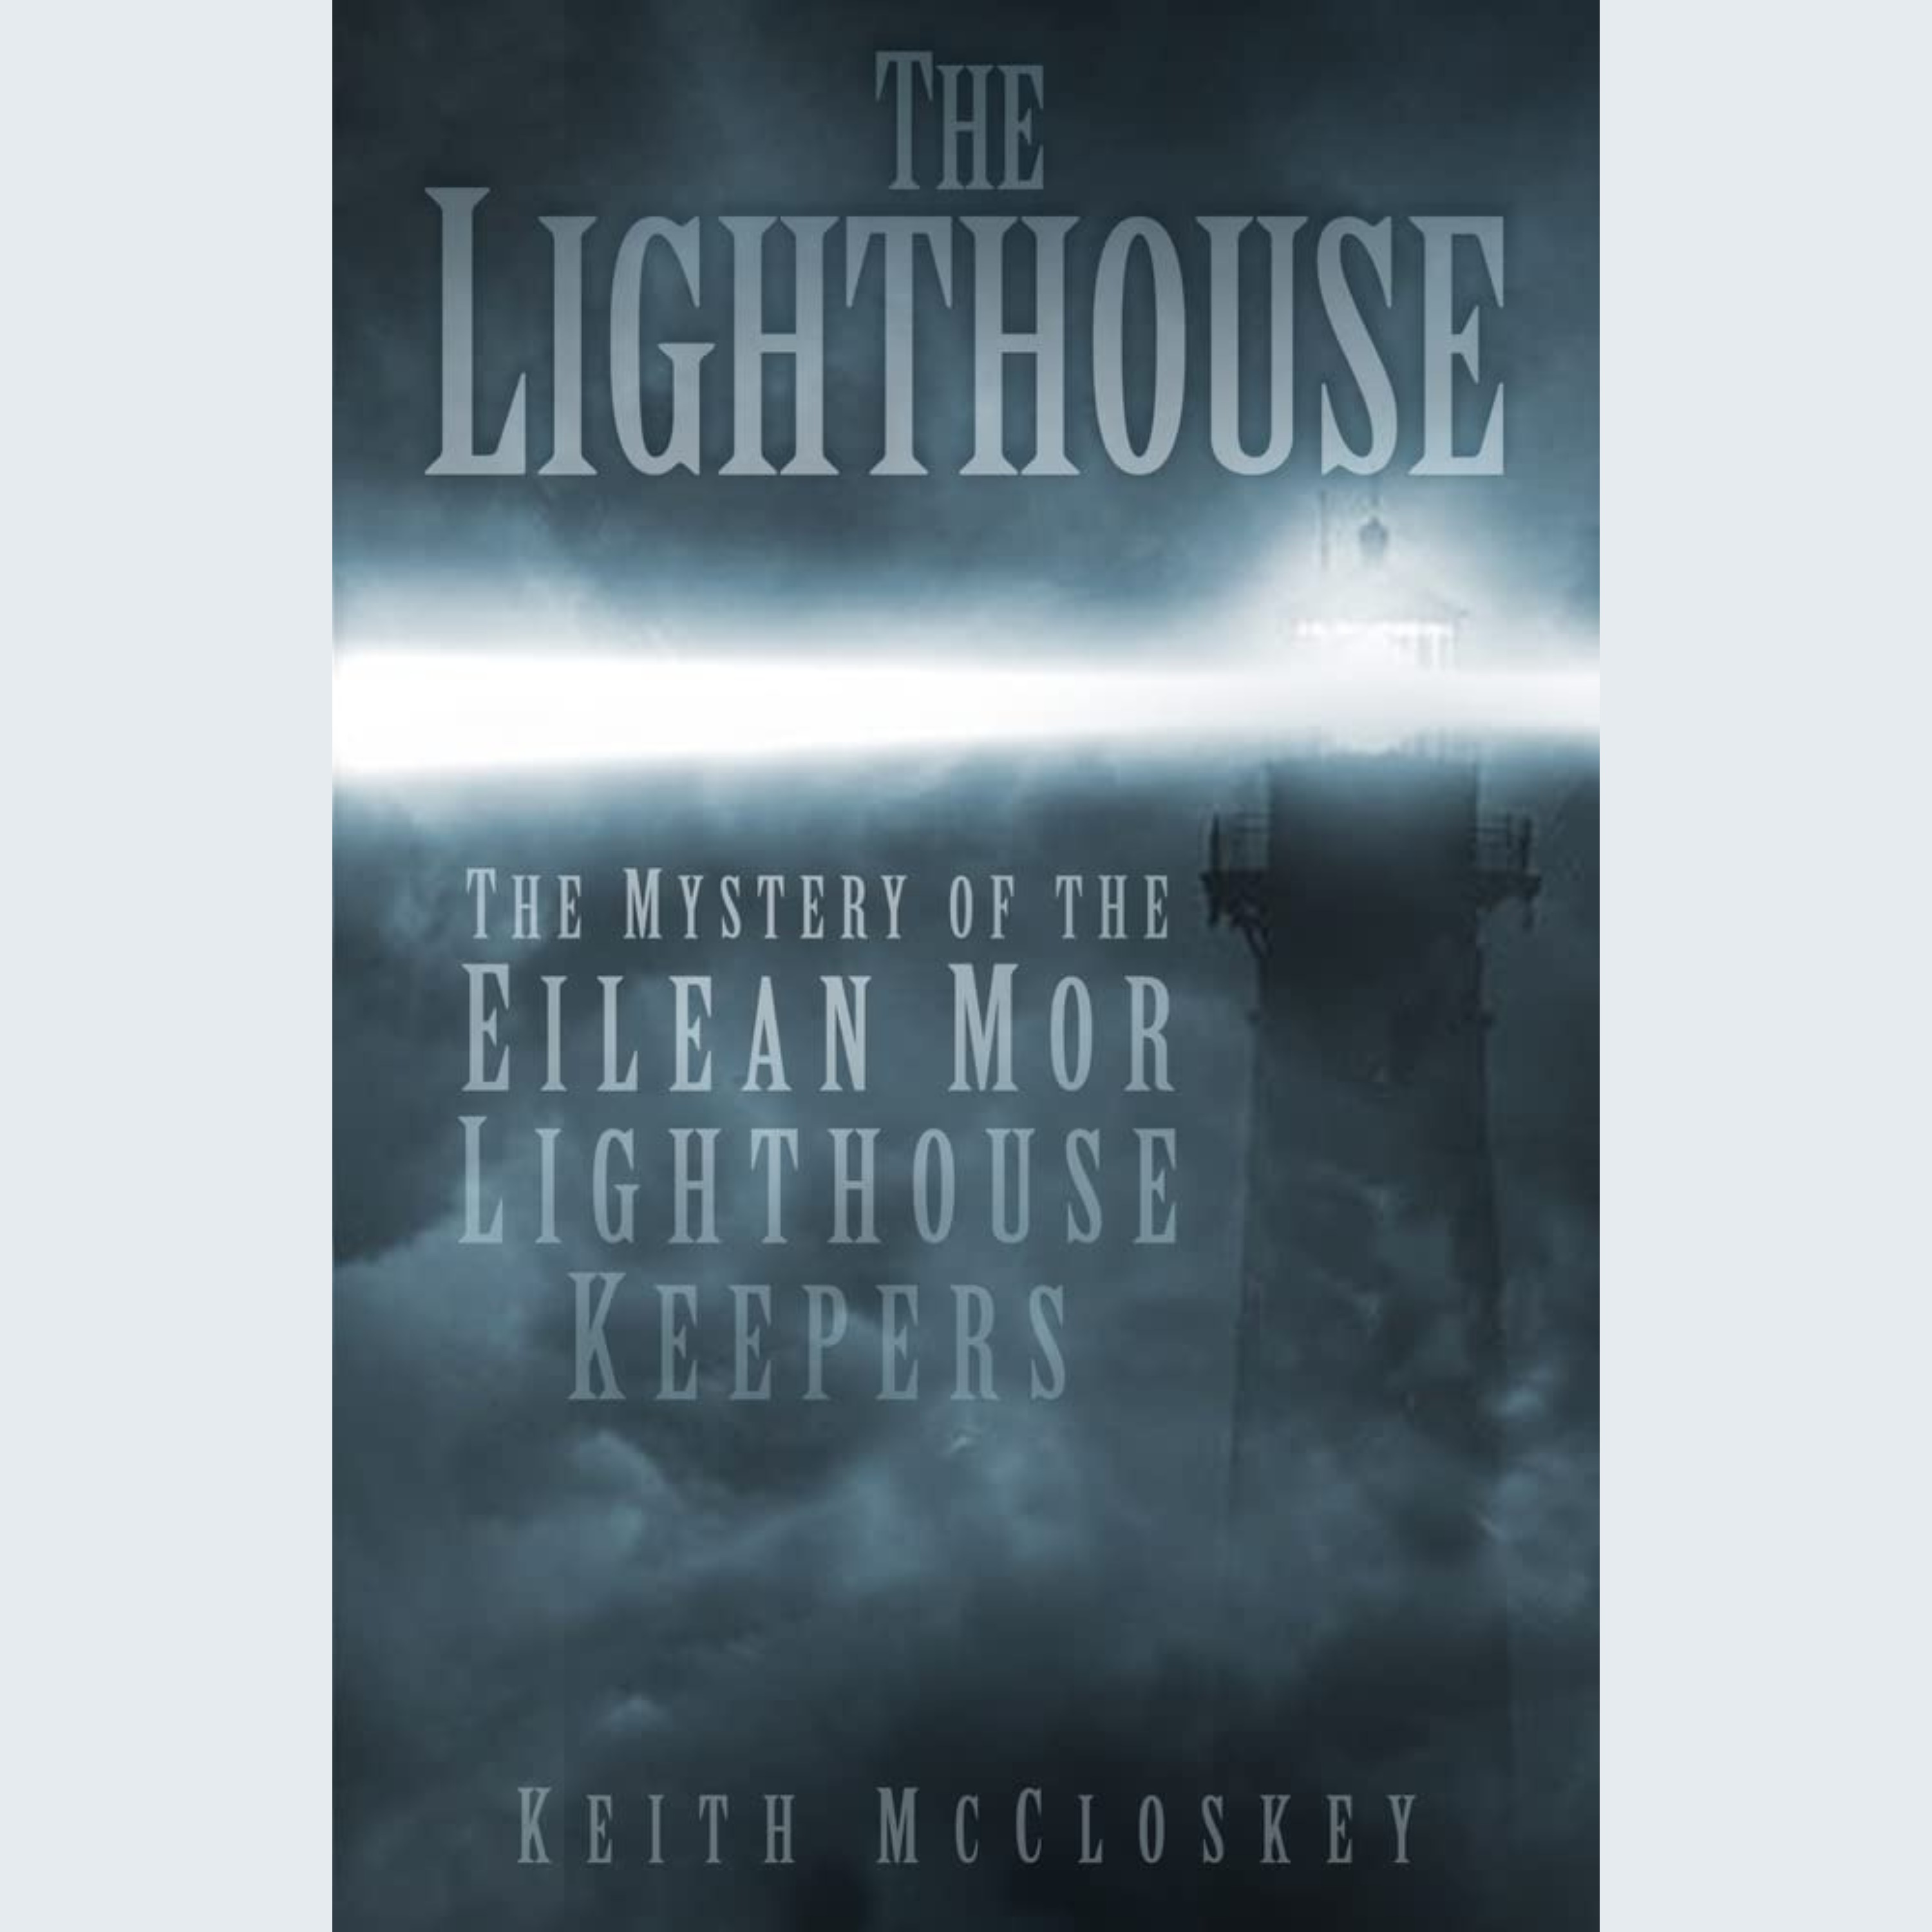 cover art for UNEXPLAINED: The Missing Lighthouse Keepers of Eilean Mor